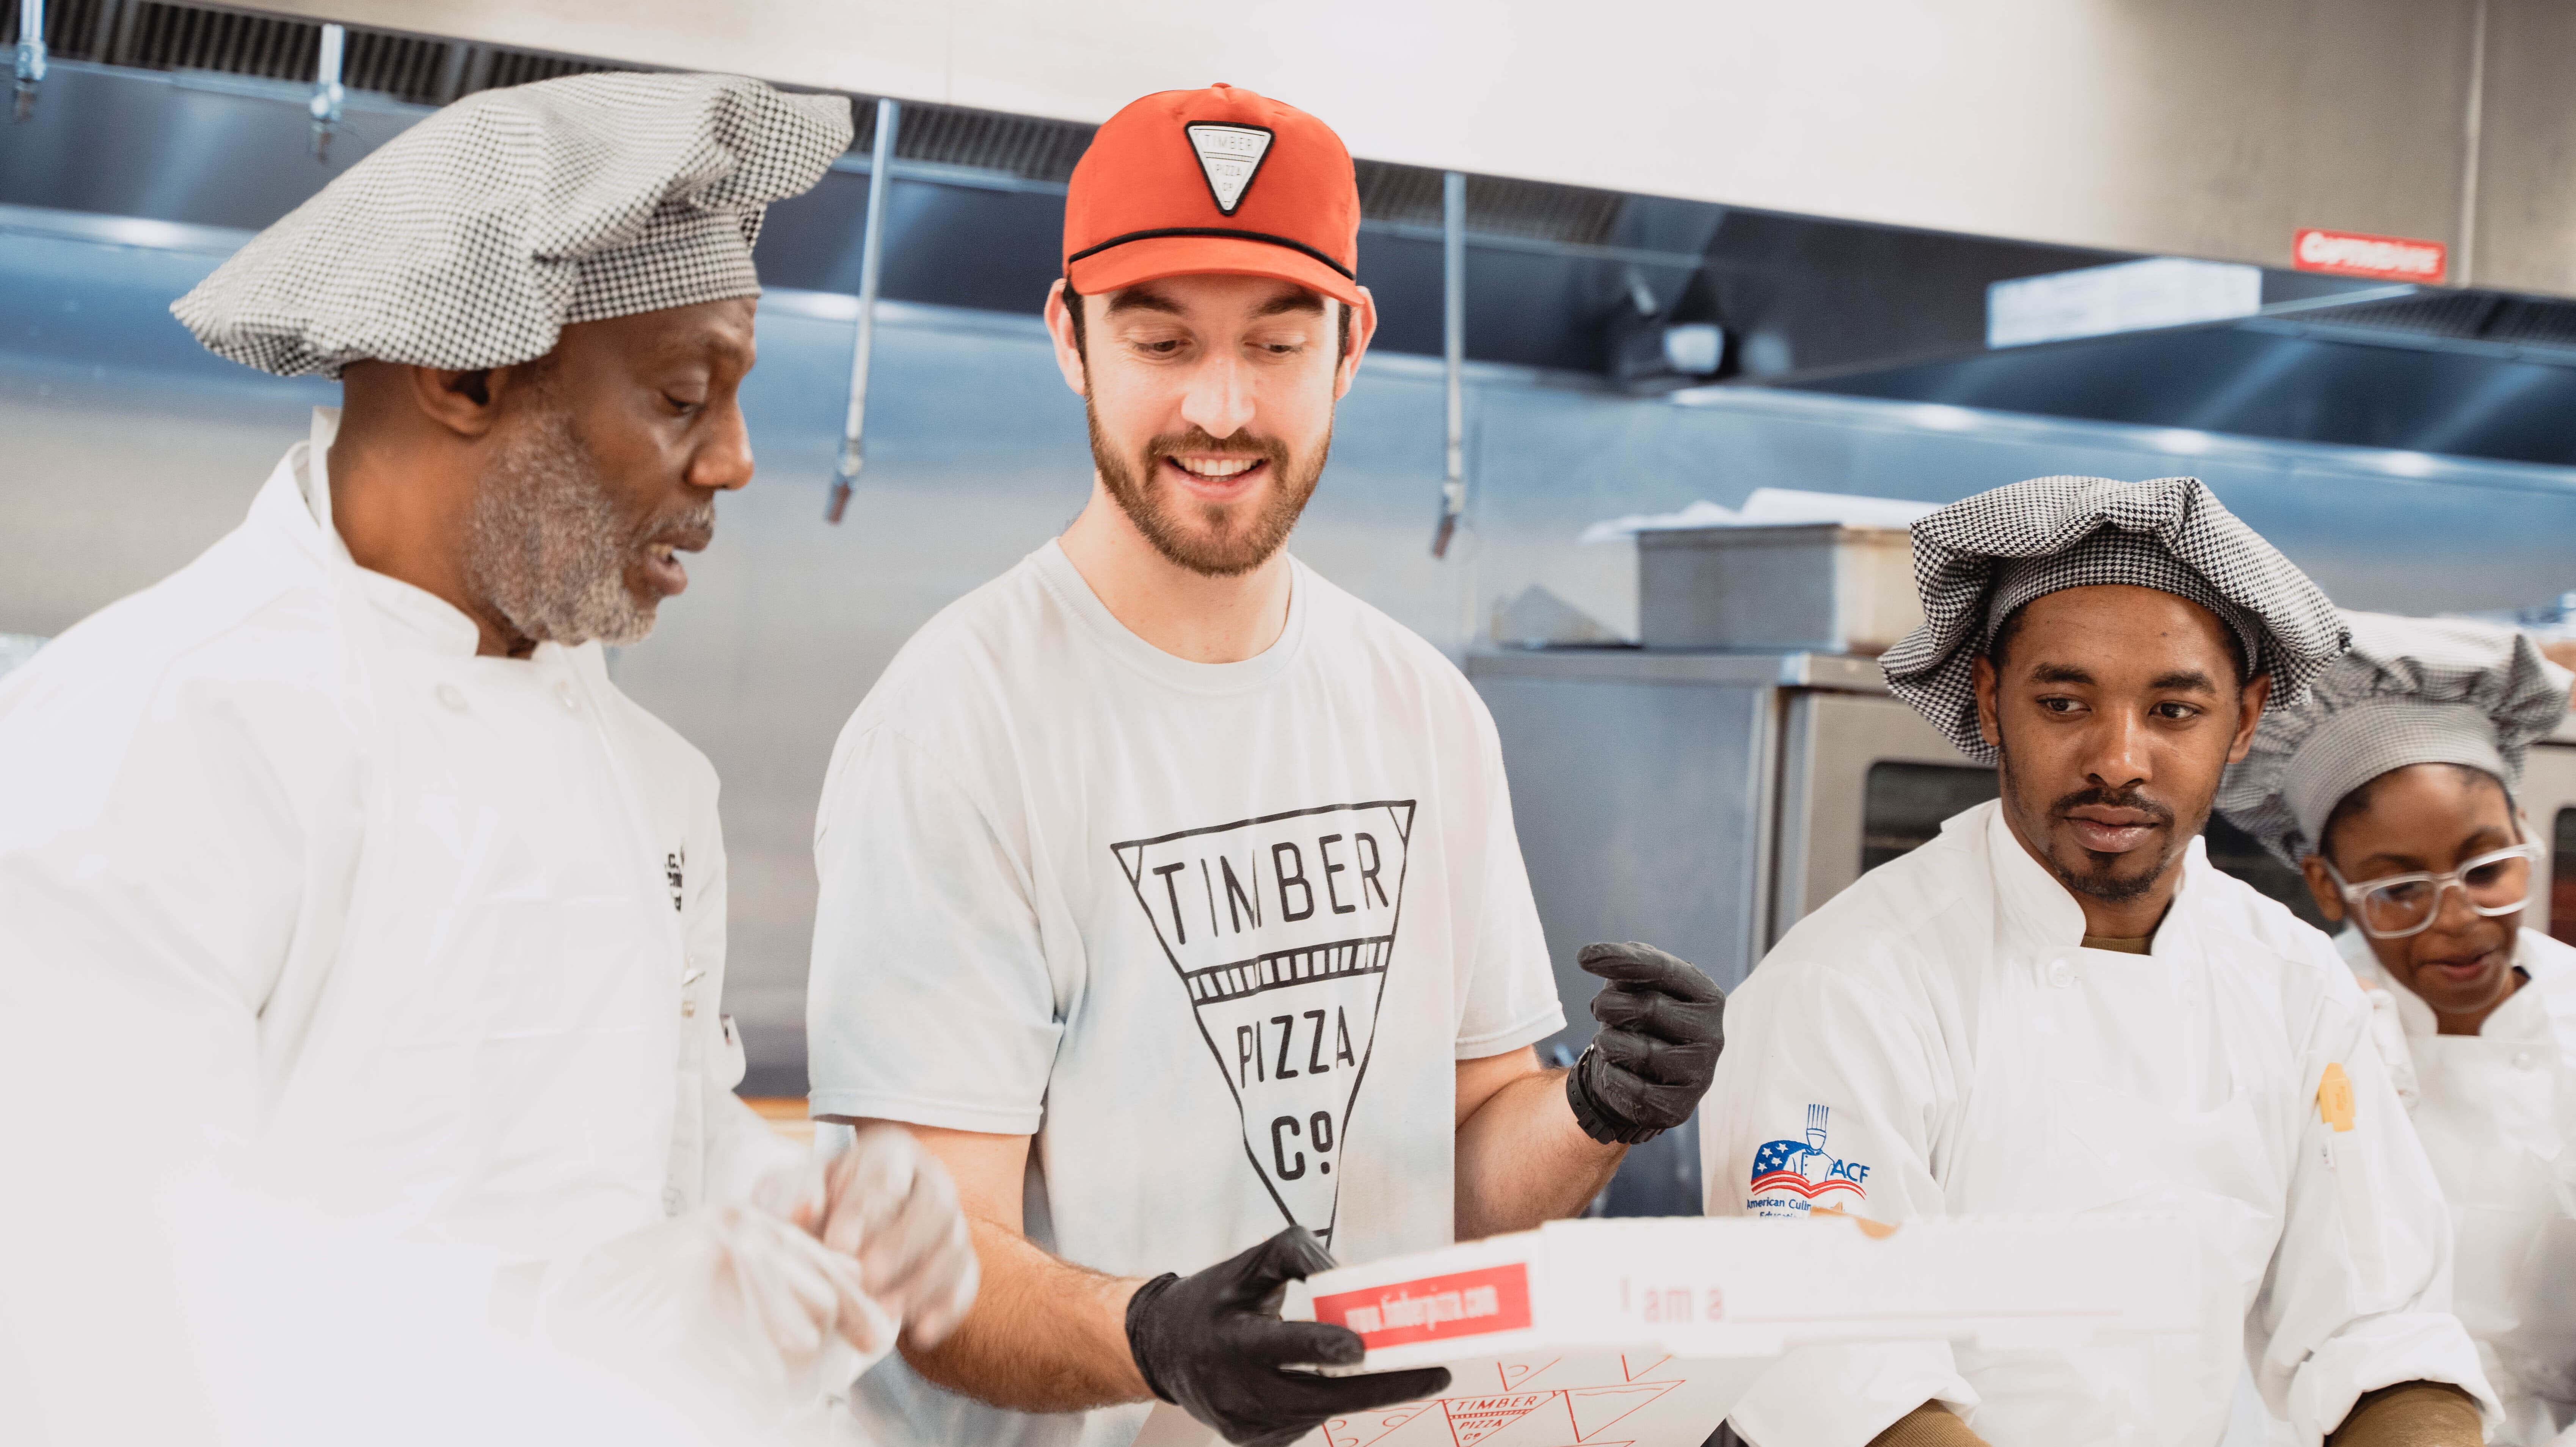 Luke Watson '18 speaking with a head chef and other cooks at the Timber Pizza store in Washington, D.C.